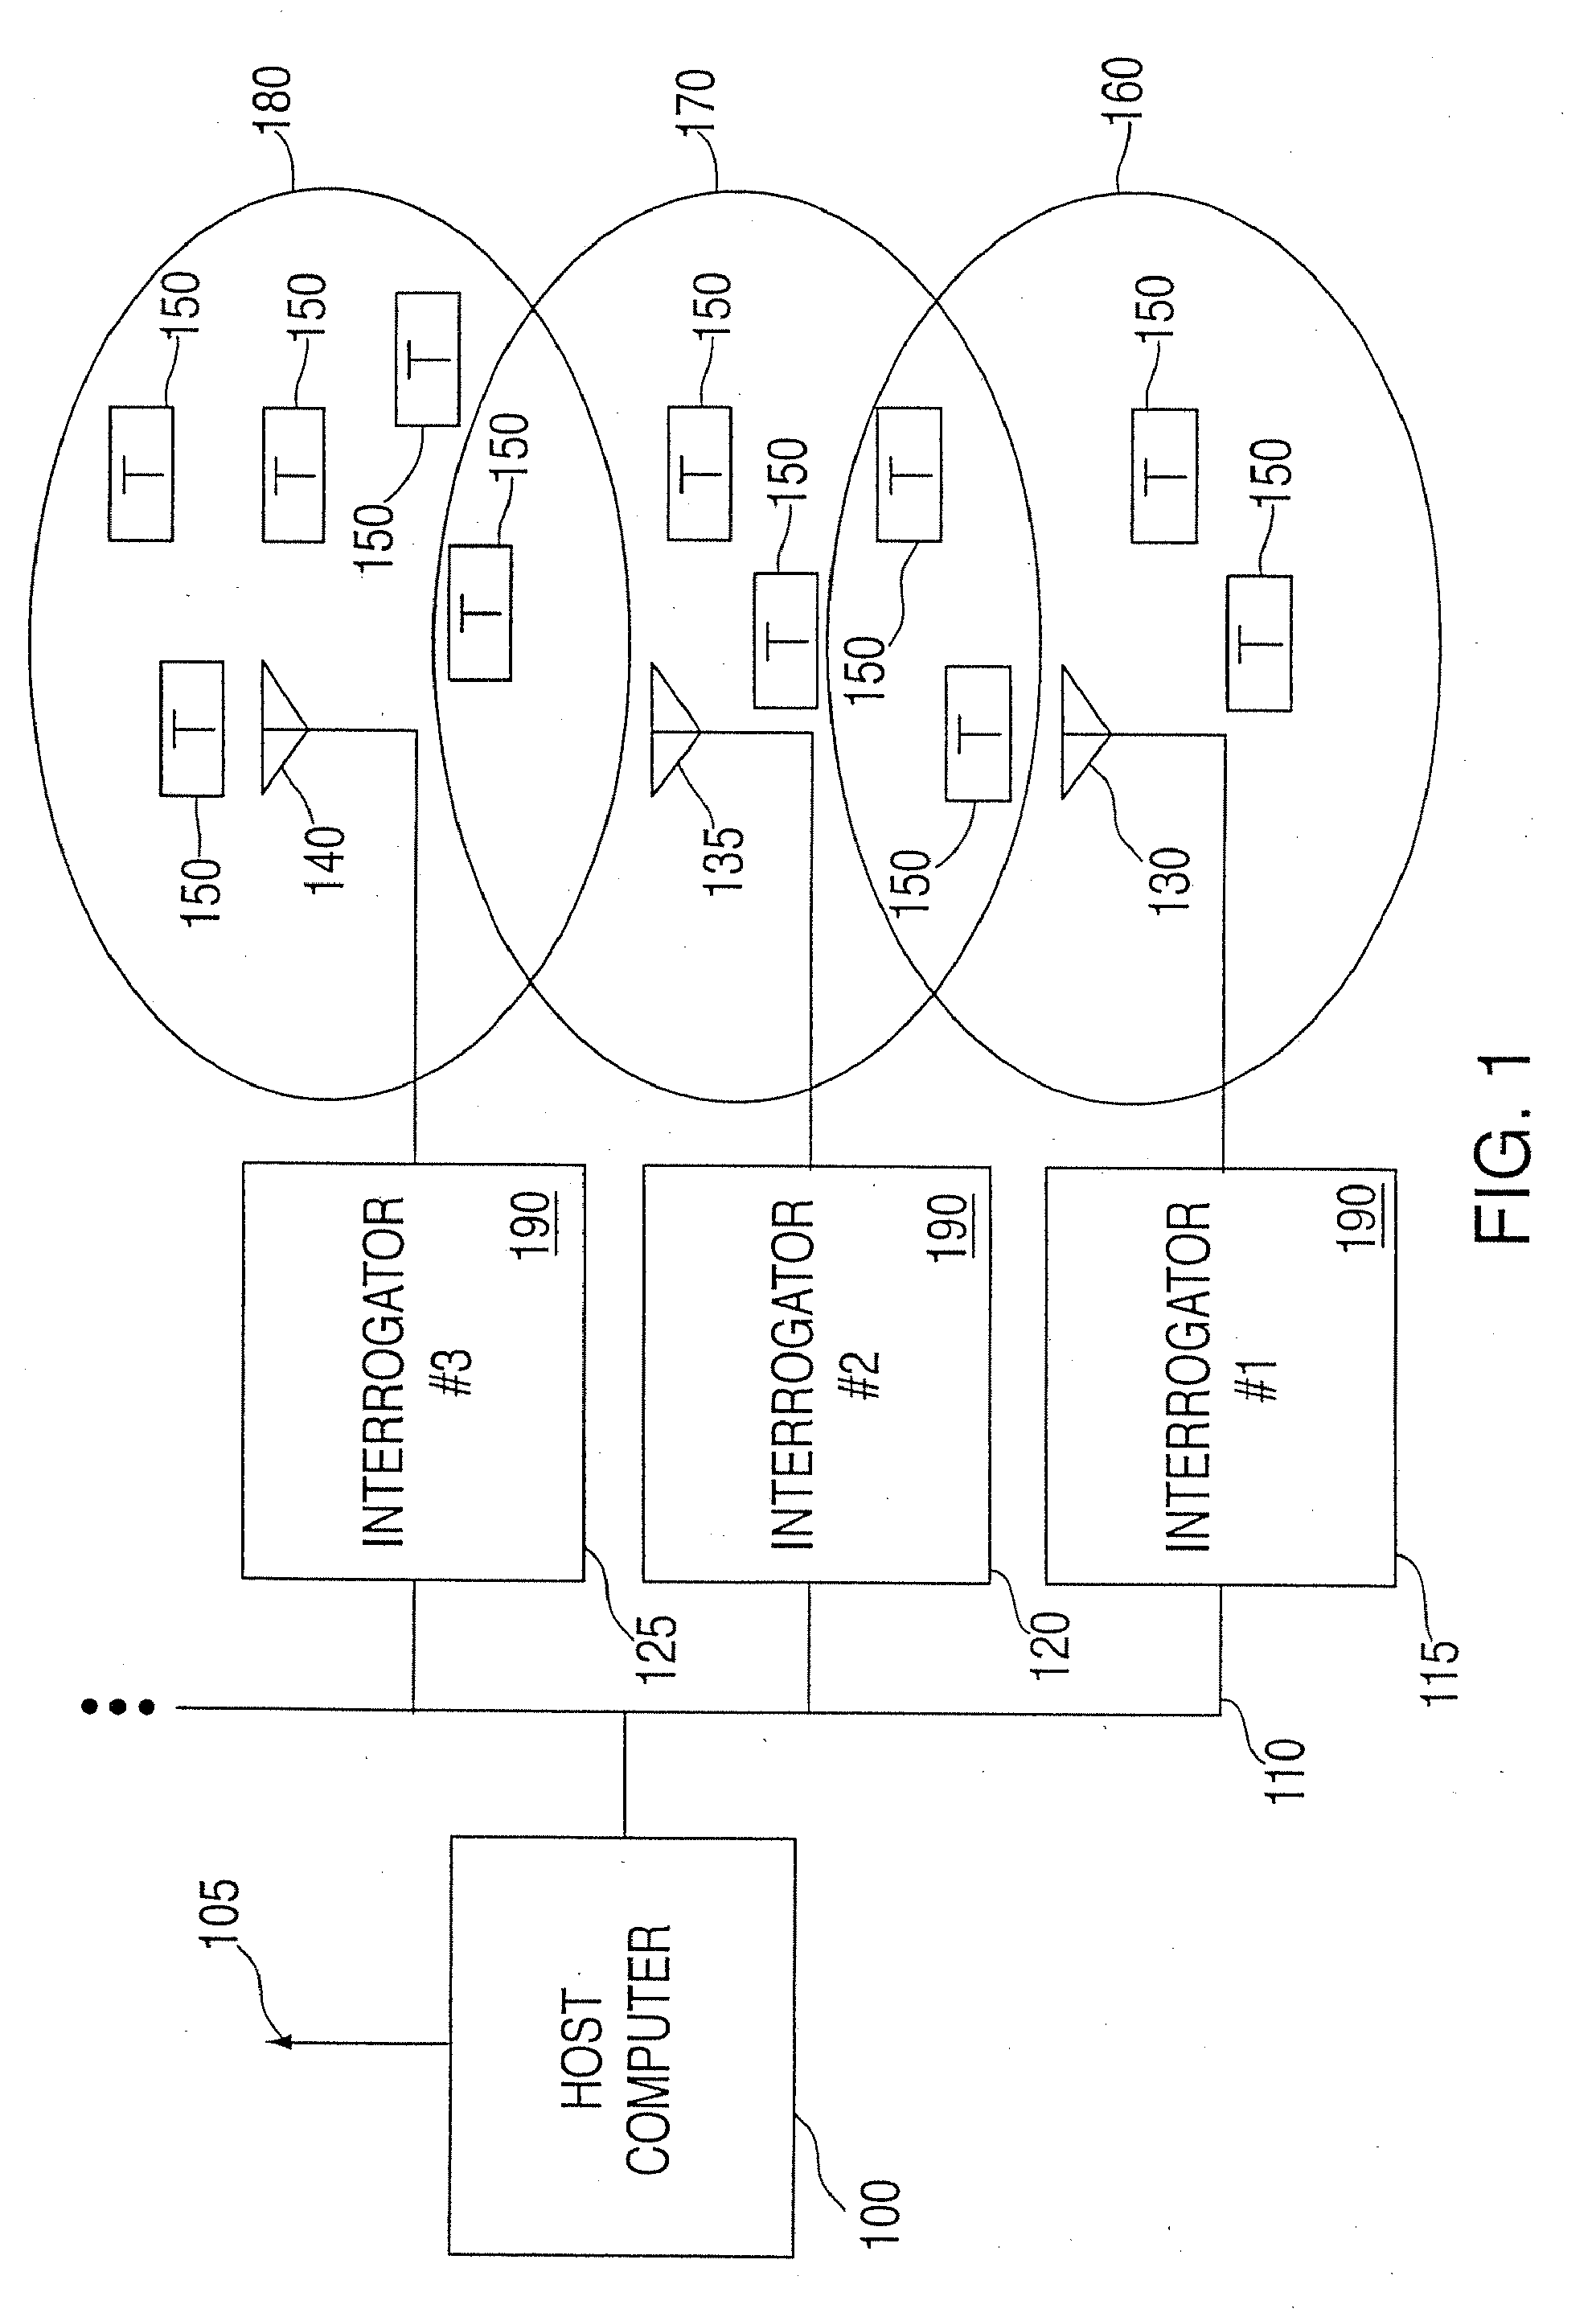 Method and system for communicating with and tracking RFID transponders